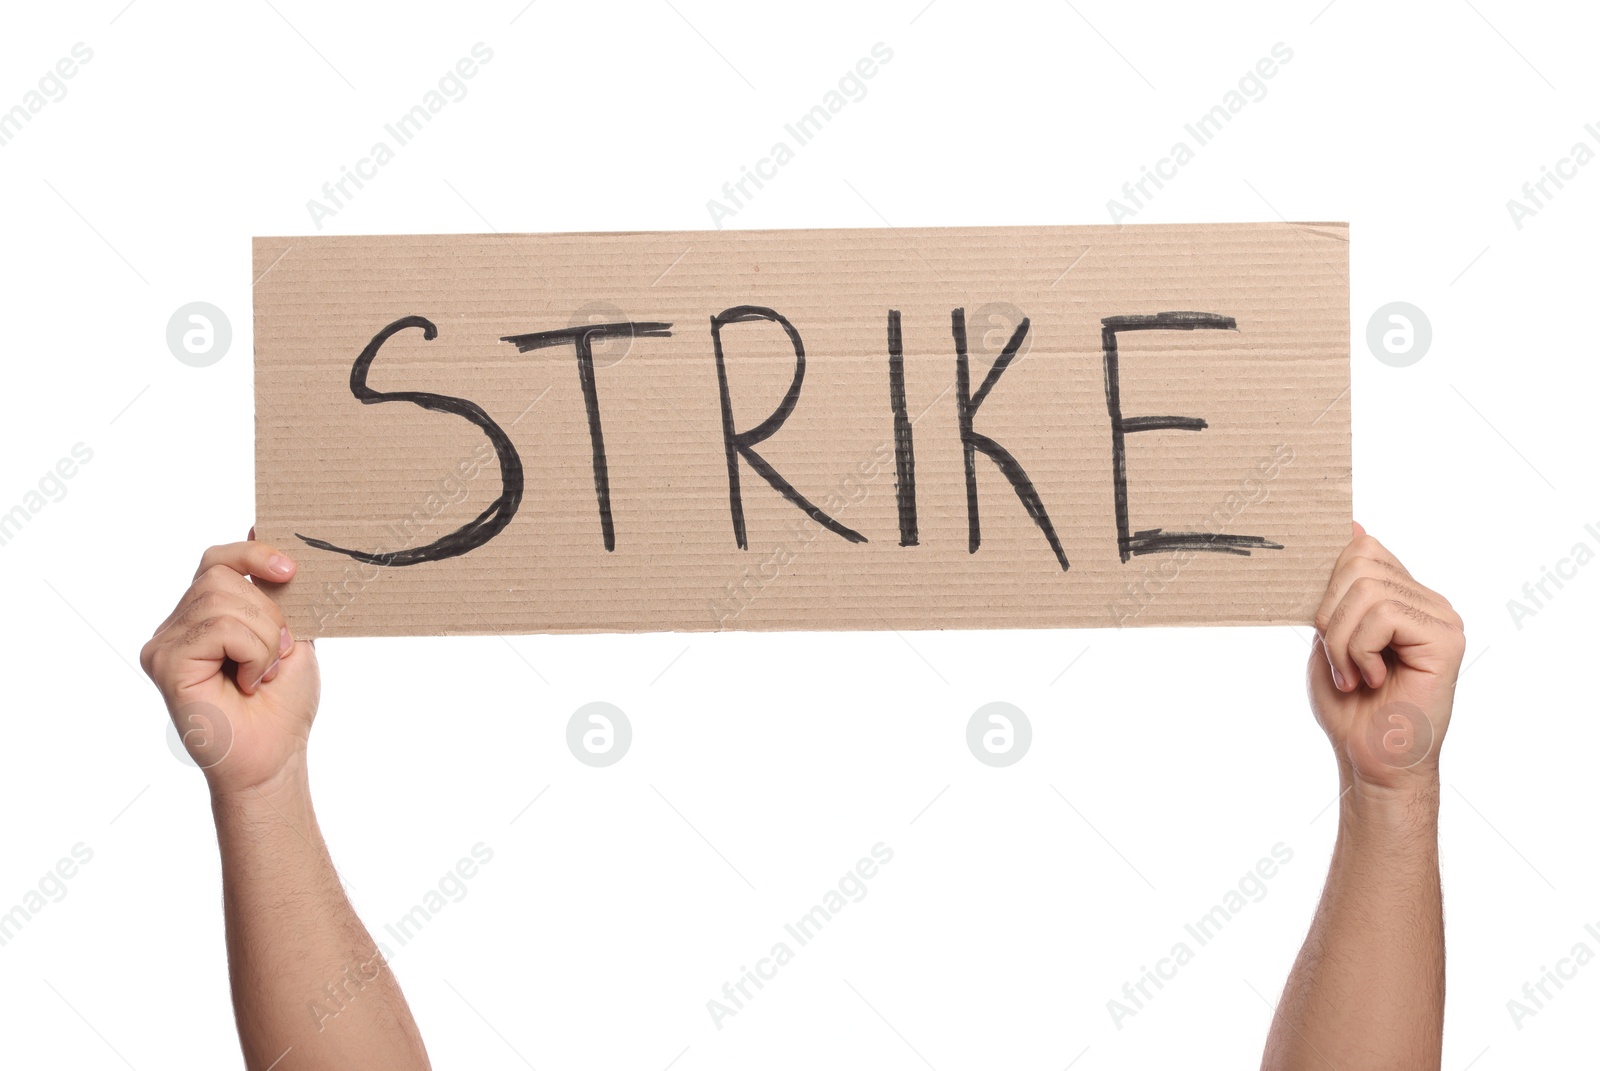 Photo of Man holding cardboard banner with word Strike on white background, closeup